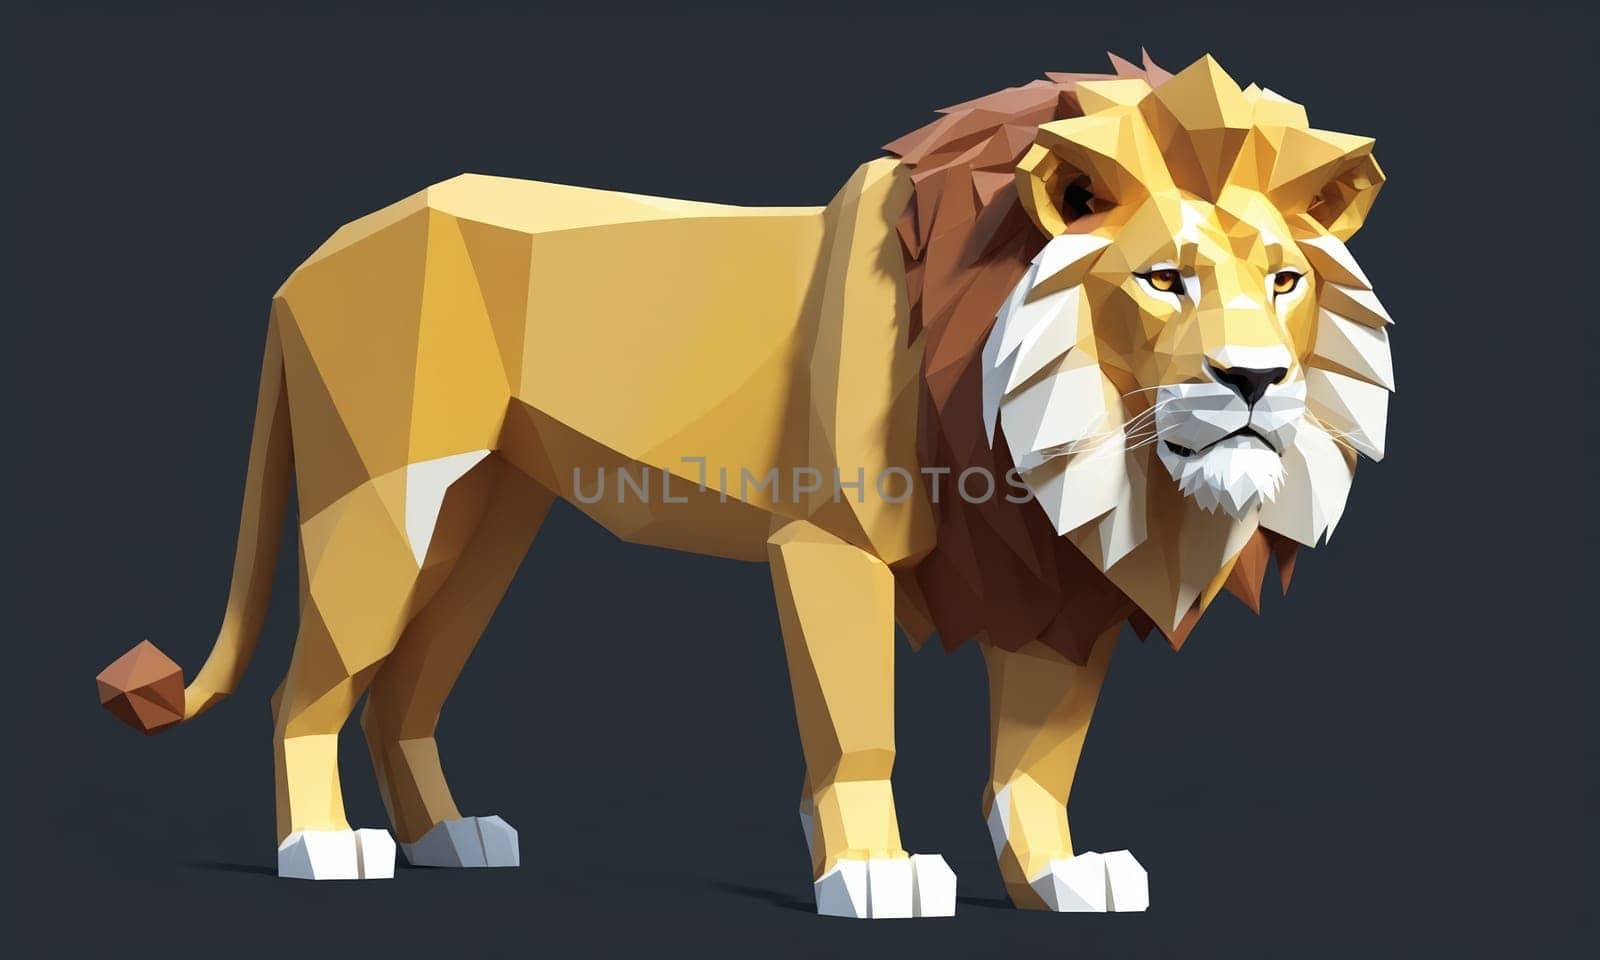 Low poly lion, a carnivorous Felidae, standing on blue surface by Andre1ns